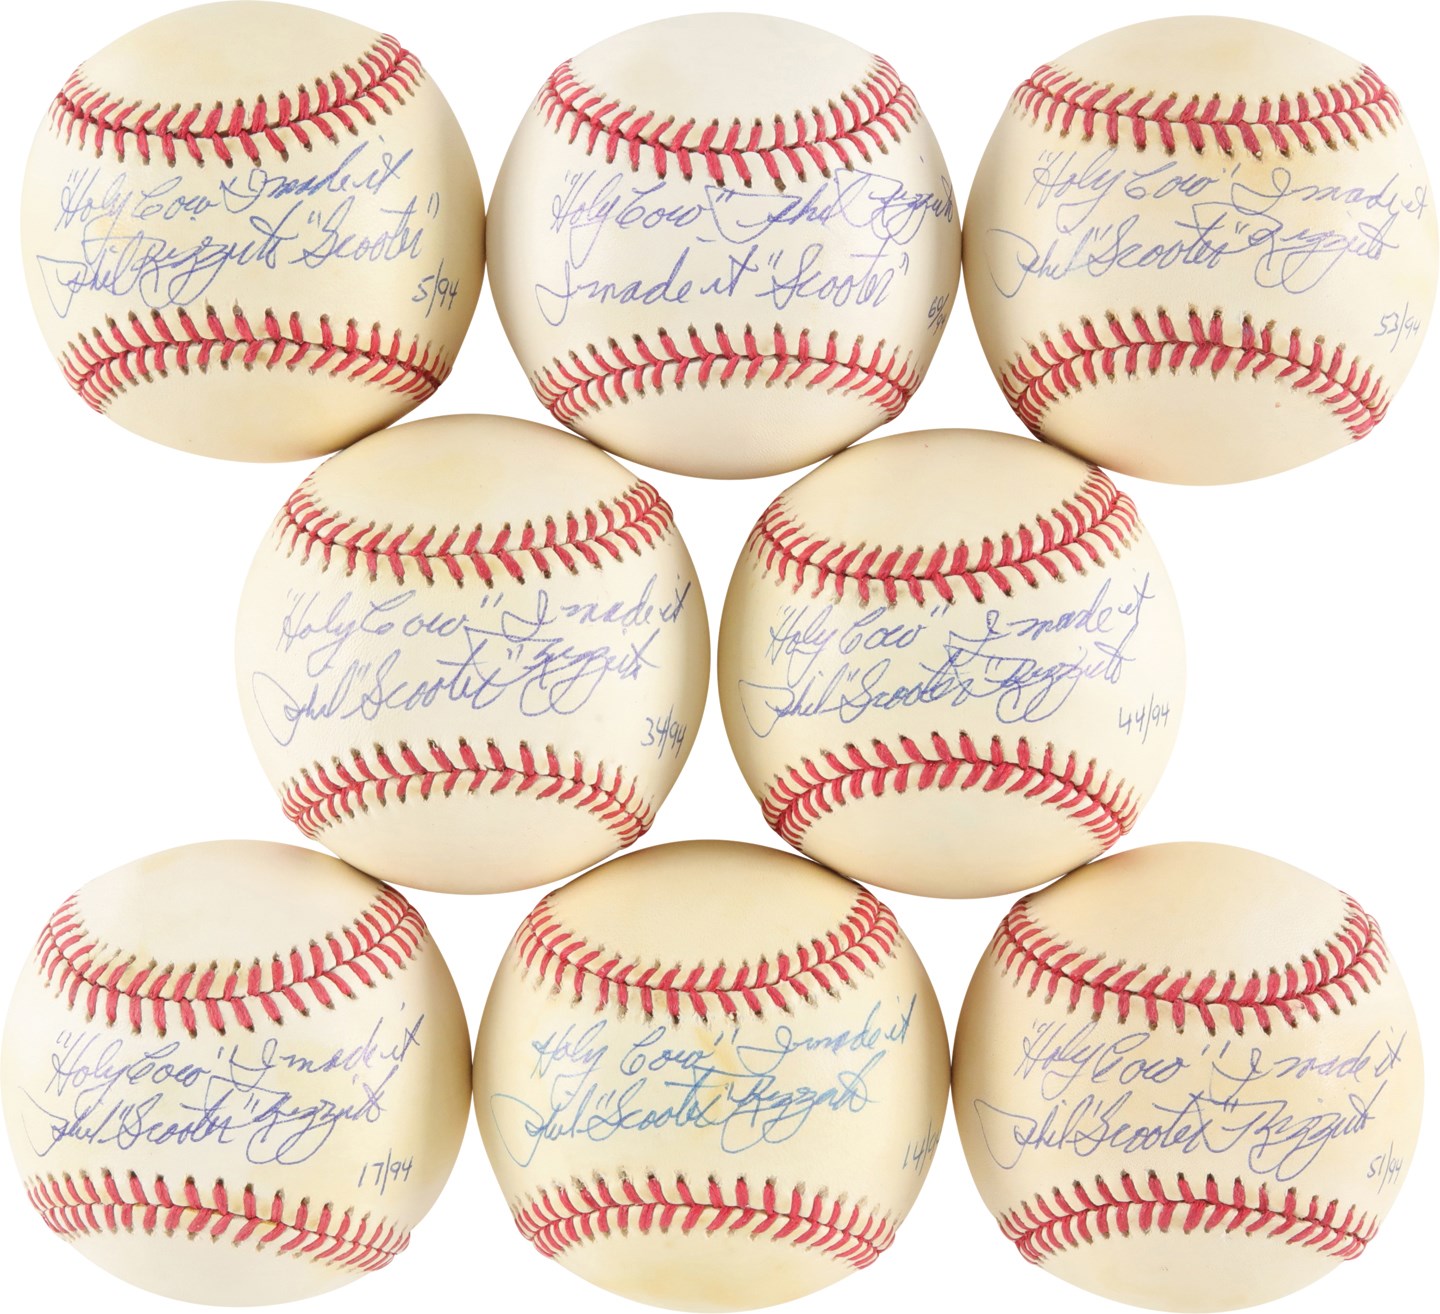 - Phil Rizzuto Limited Edition "Holy Cow I Made It" Signed Inscribed Baseballs (8)